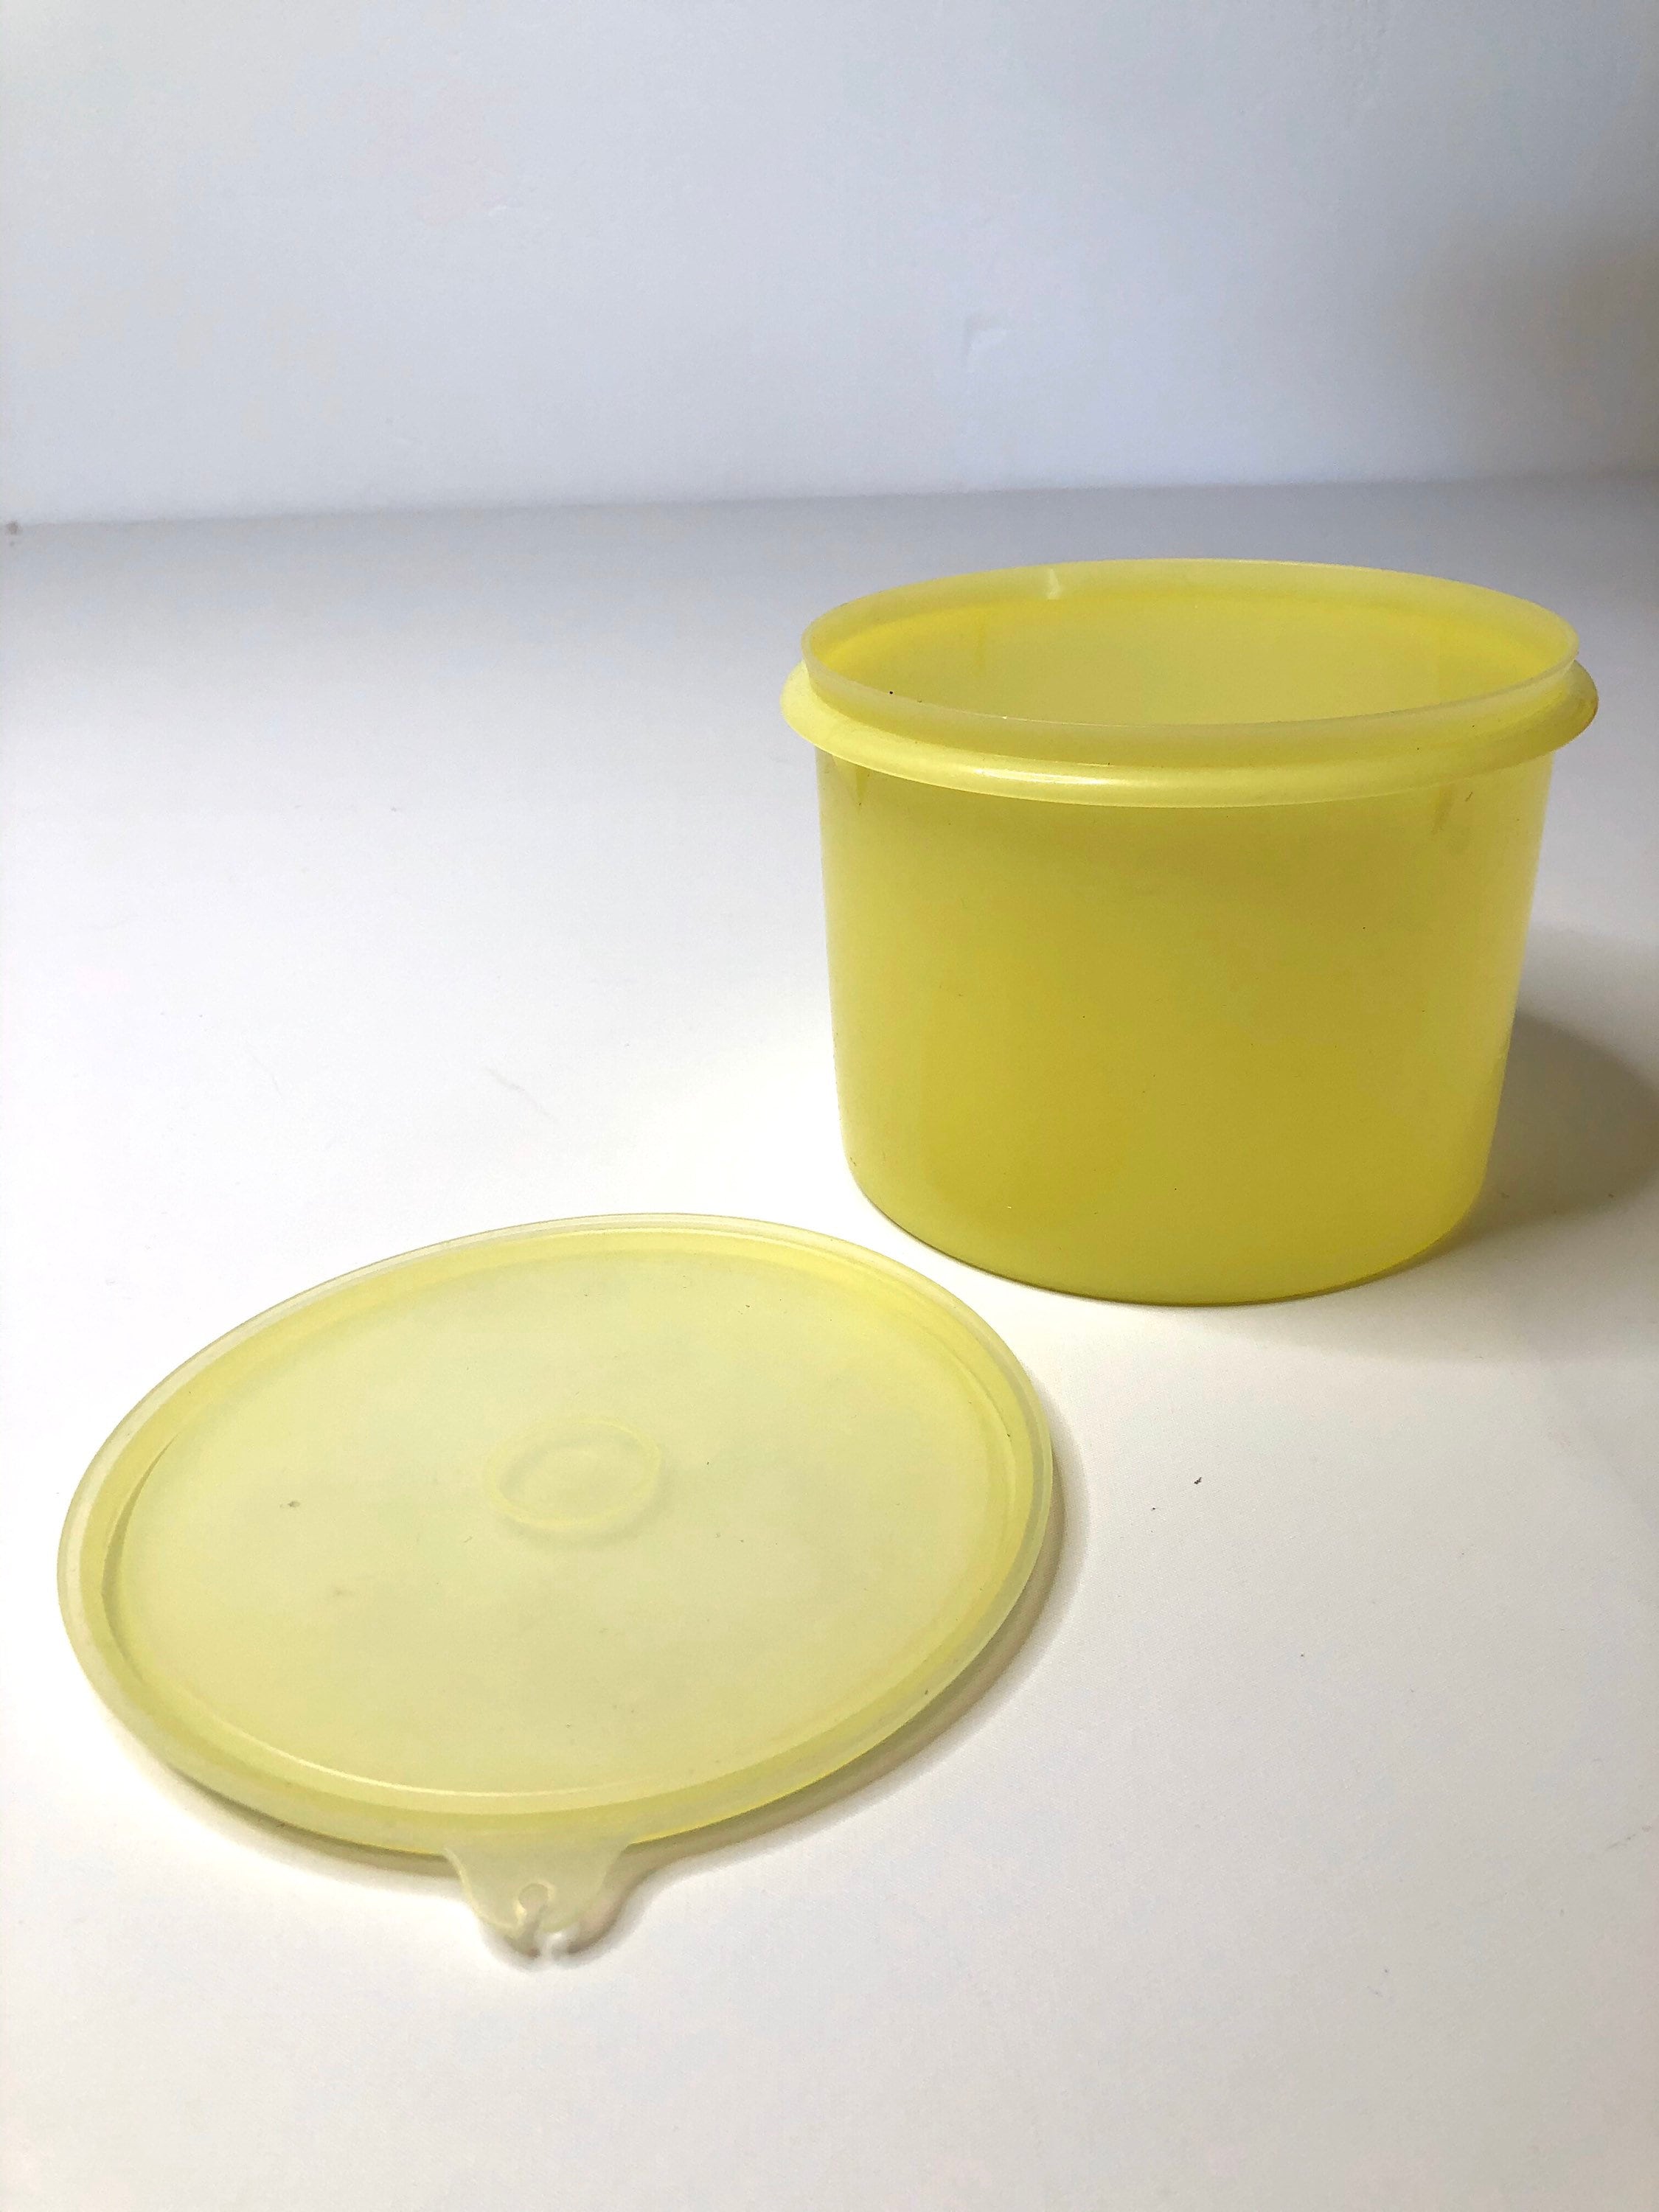 Tupperware Gourmet Counterparts Canister Cookies Jar 900ml Airtight -   Finland